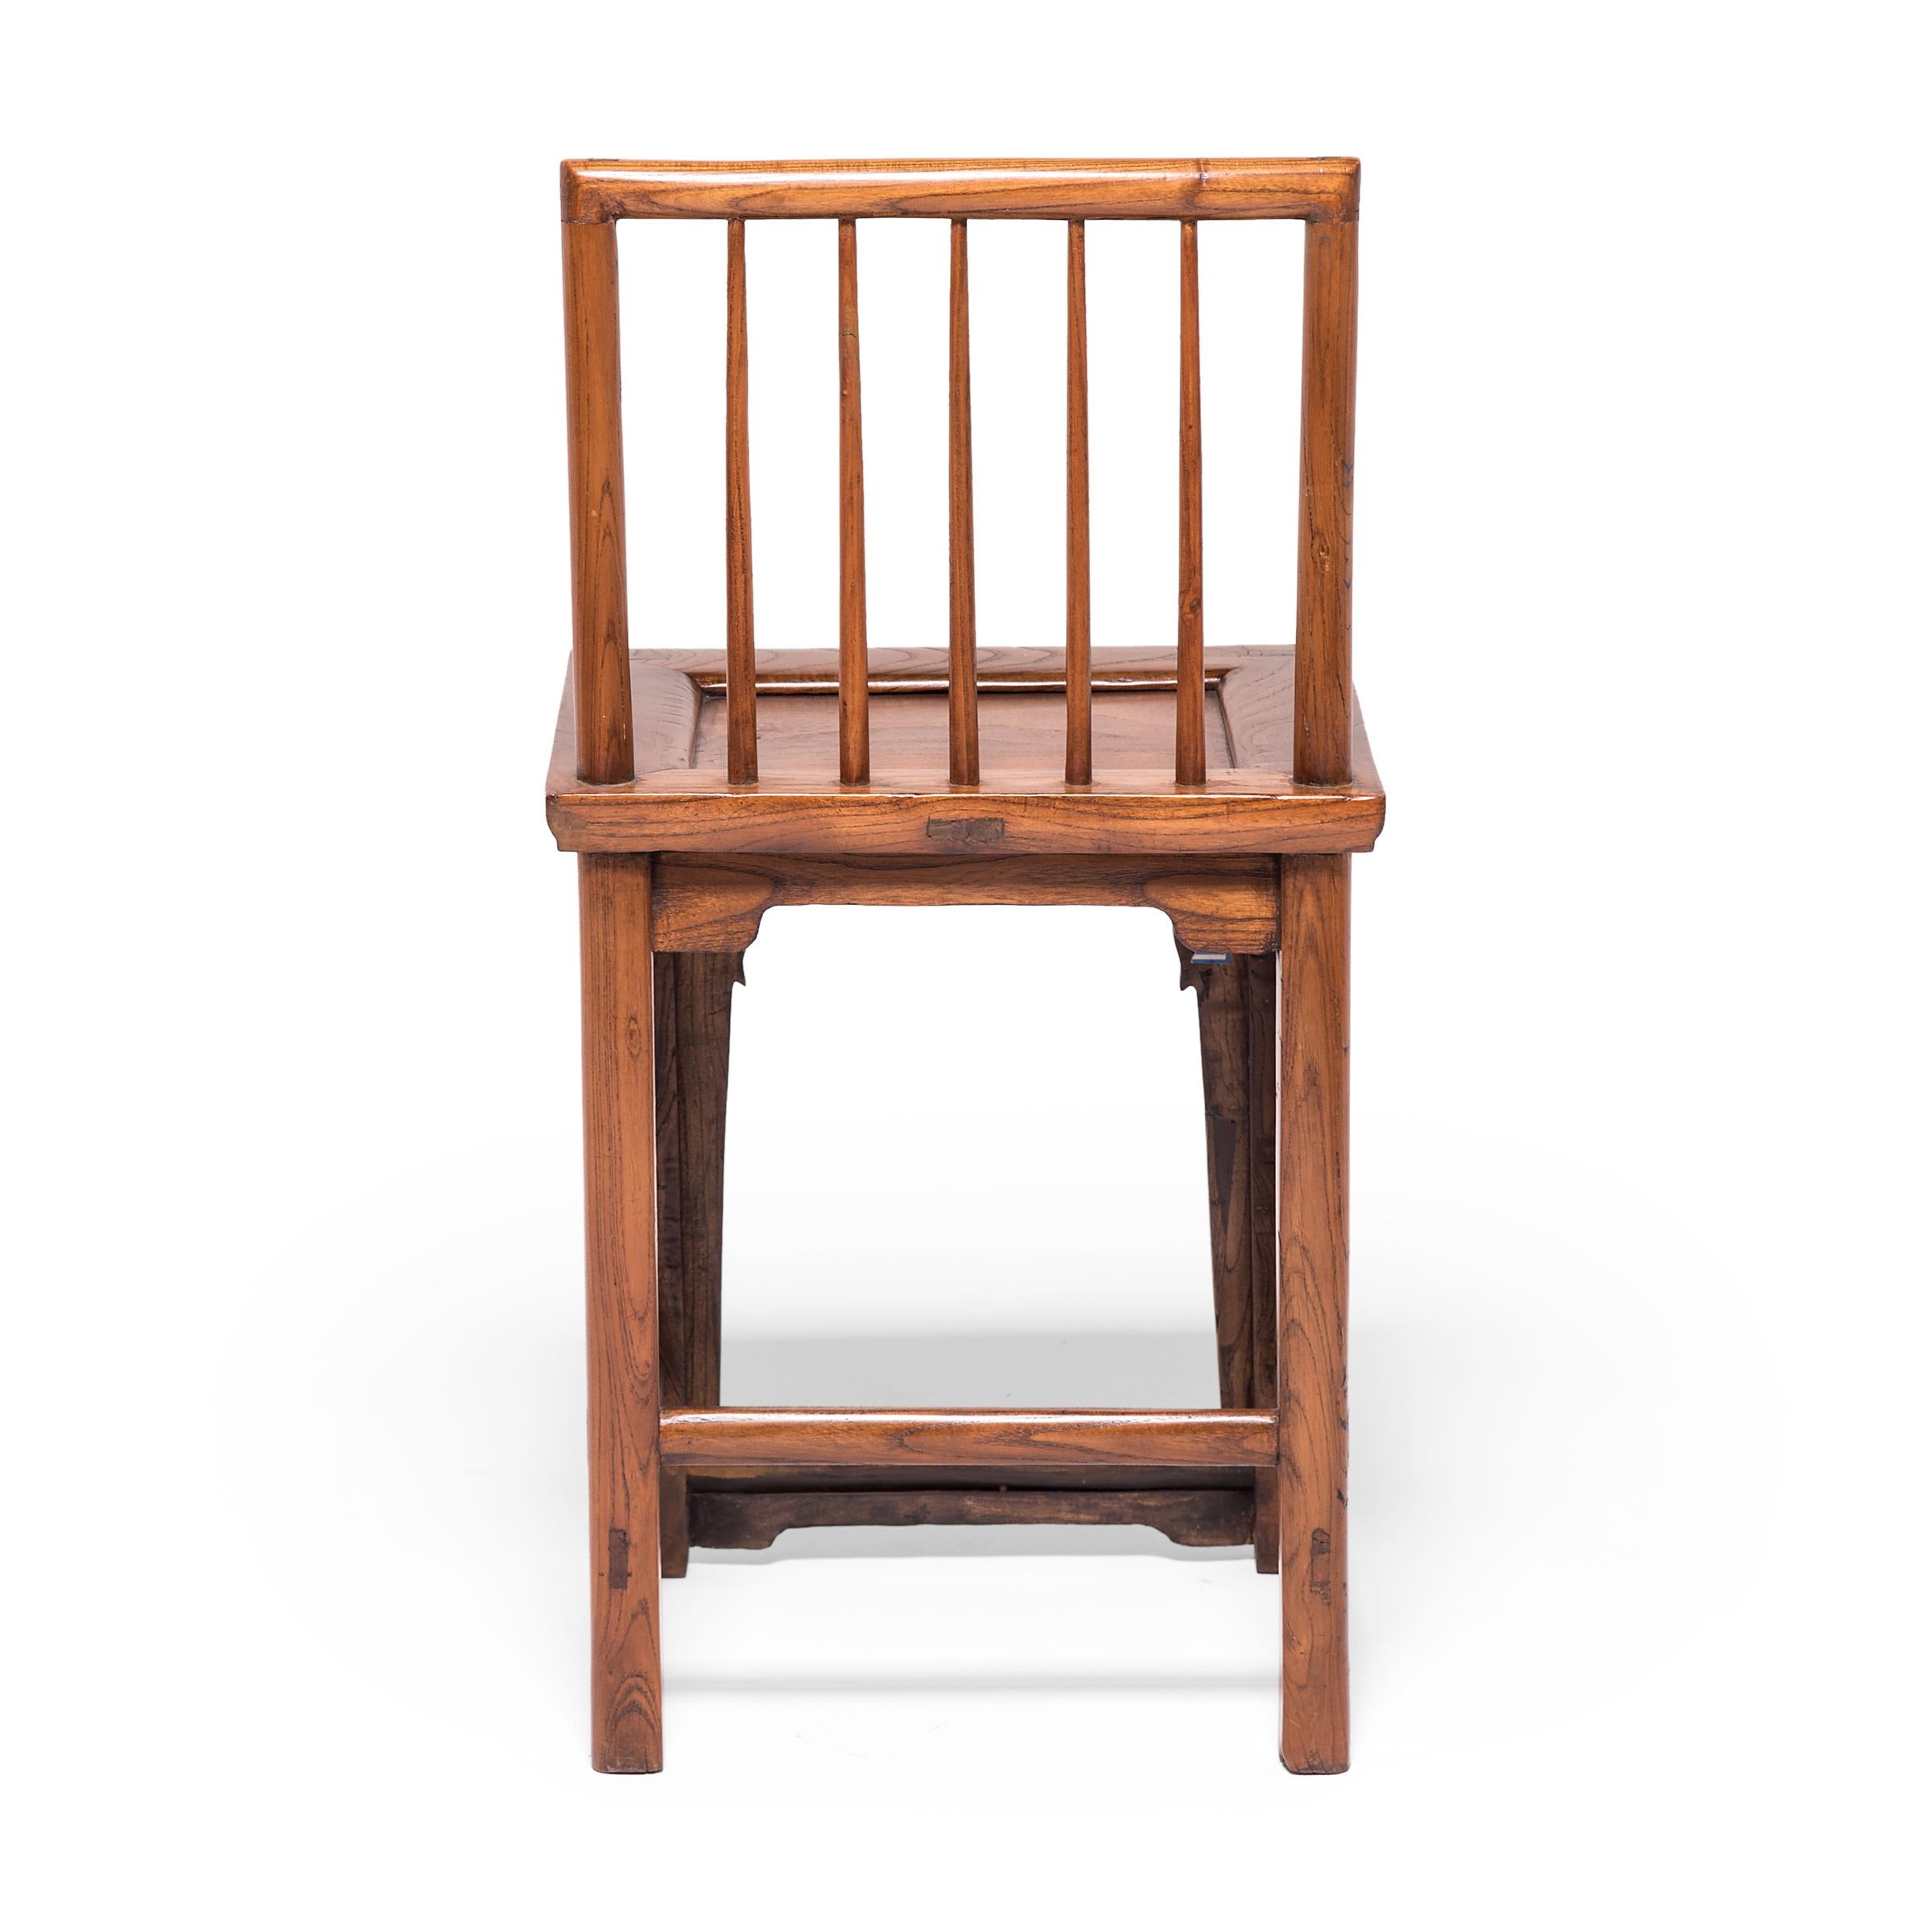 20th Century Pair of Chinese Walnut Spindleback Chairs, c. 1900 For Sale